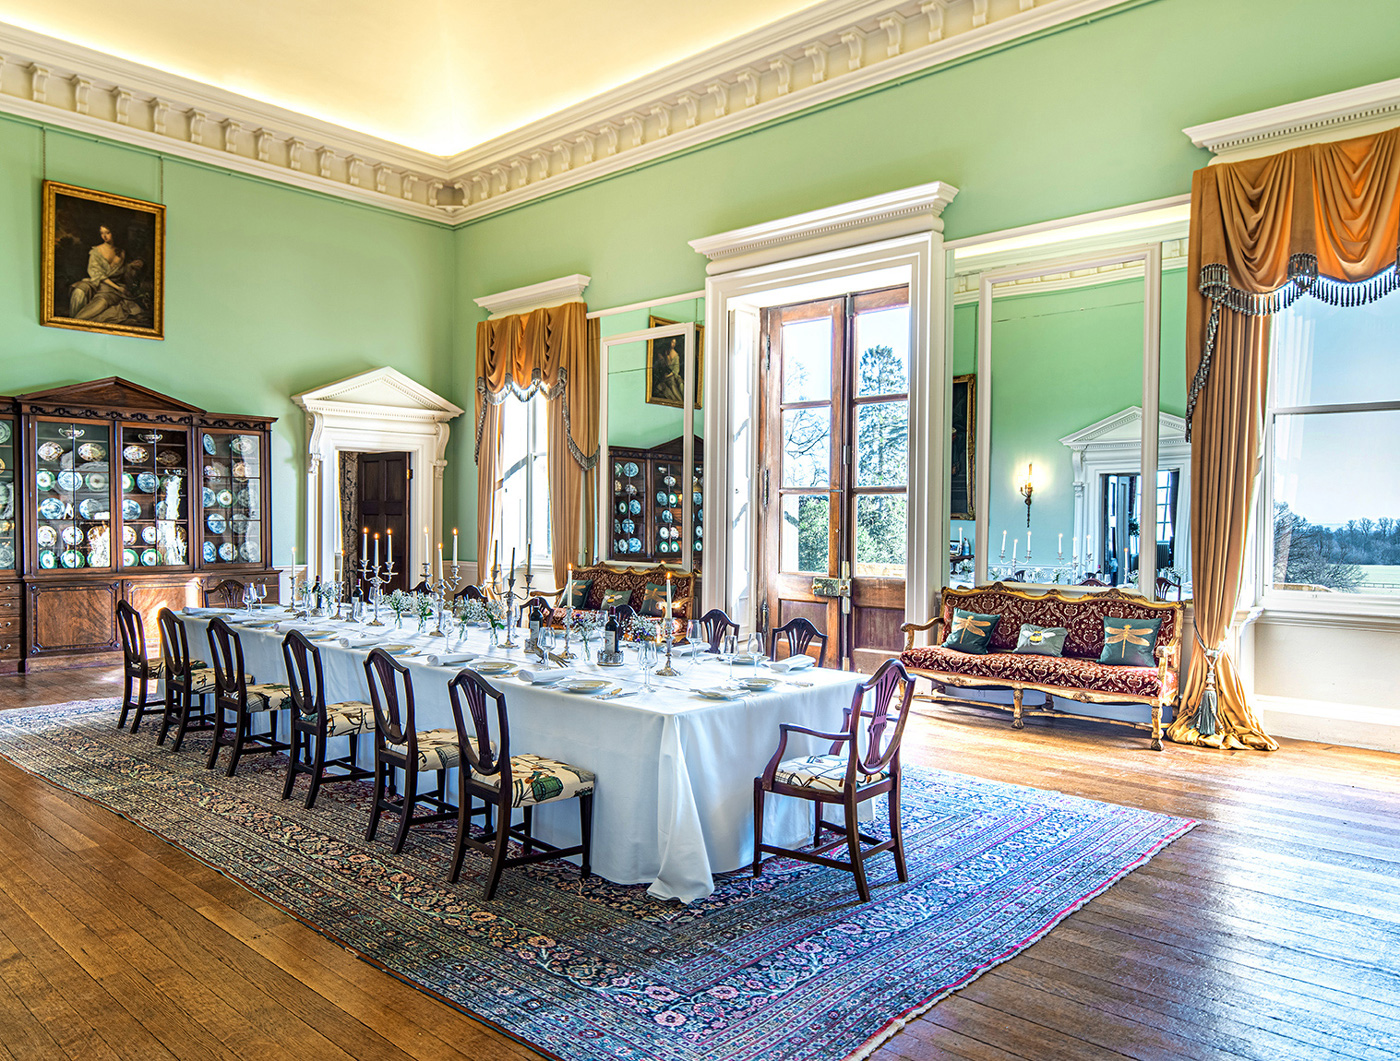 Dining setup in the Saloon at Kirtlington Park